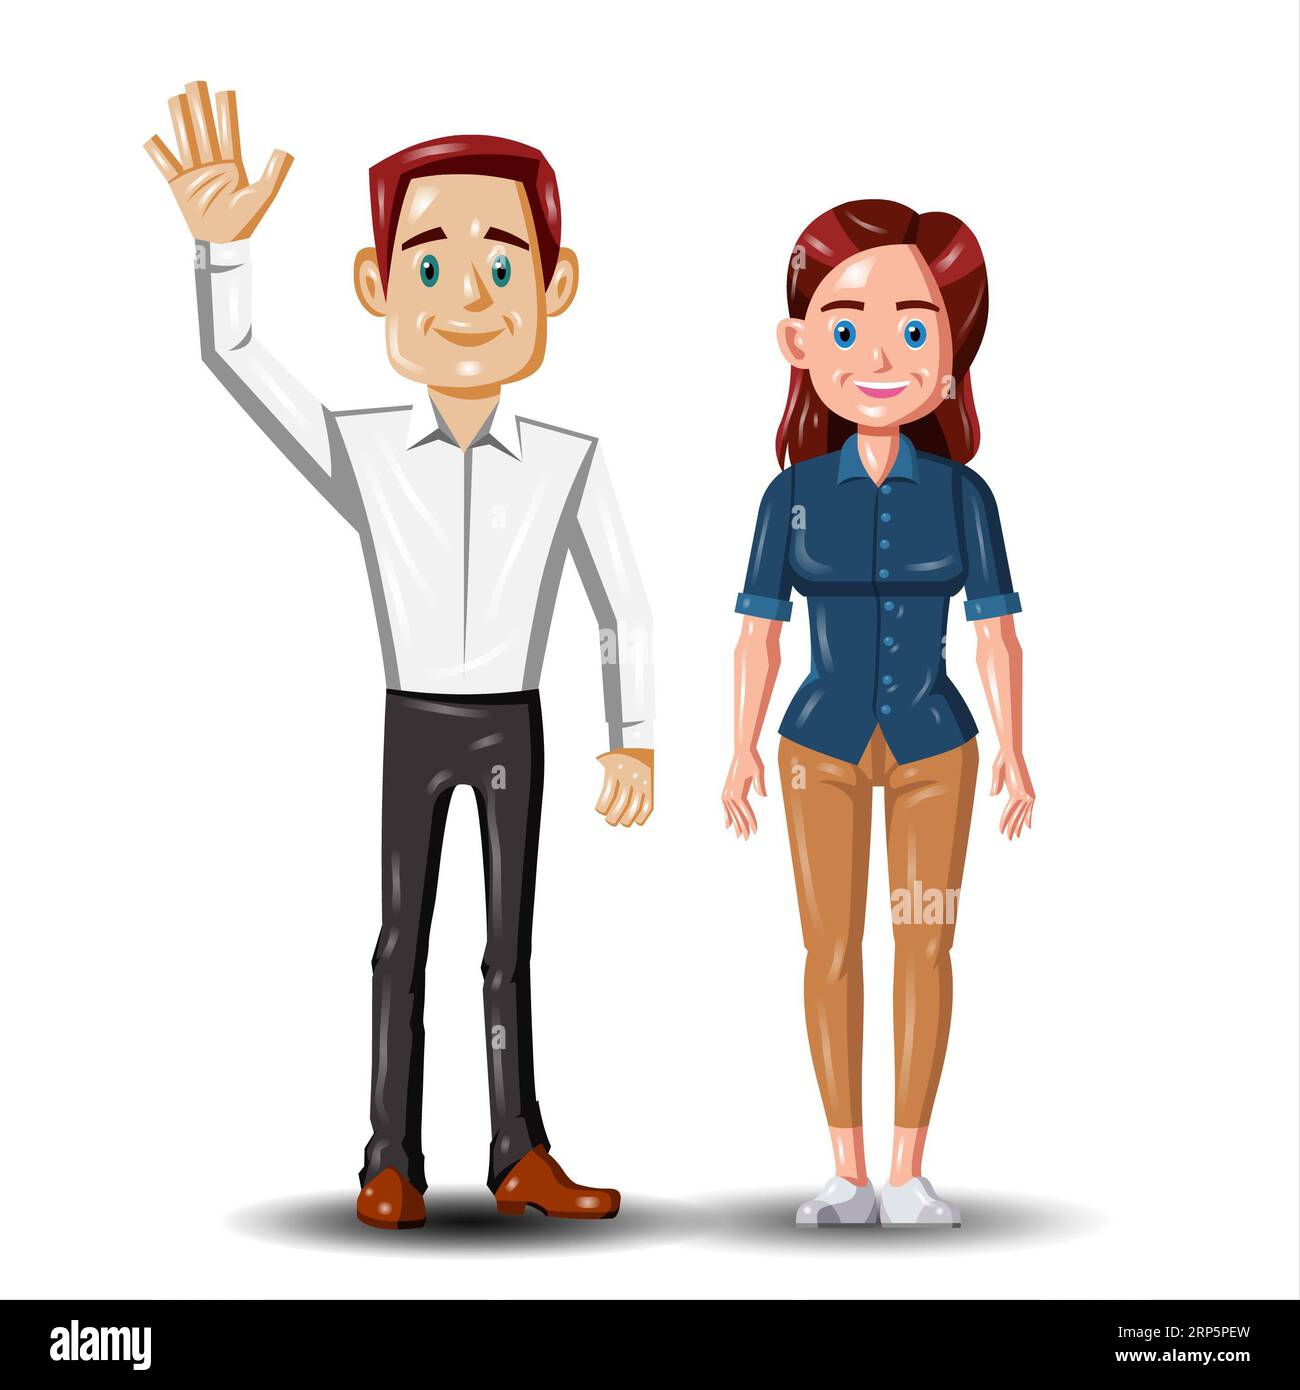 Man and woman waving hand isolated on white background. Vector illustration. Stock Photo